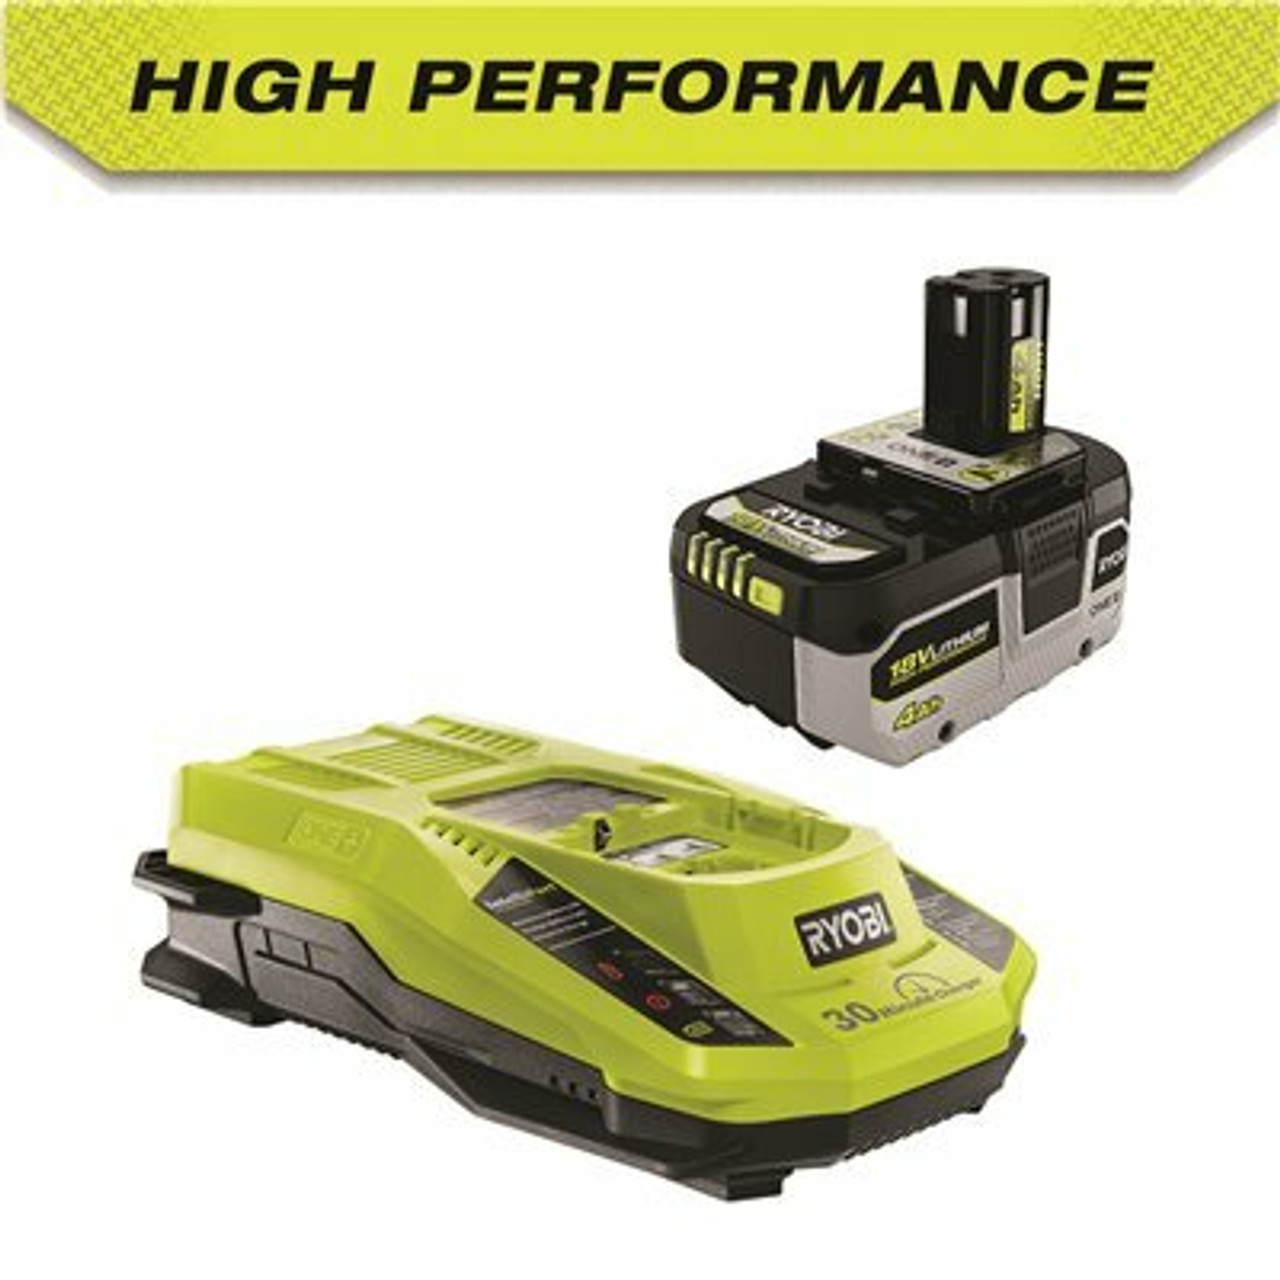 Ryobi One+ 18V High Performance Lithium-Ion 4.0 Ah Battery And Charger Starter Kit